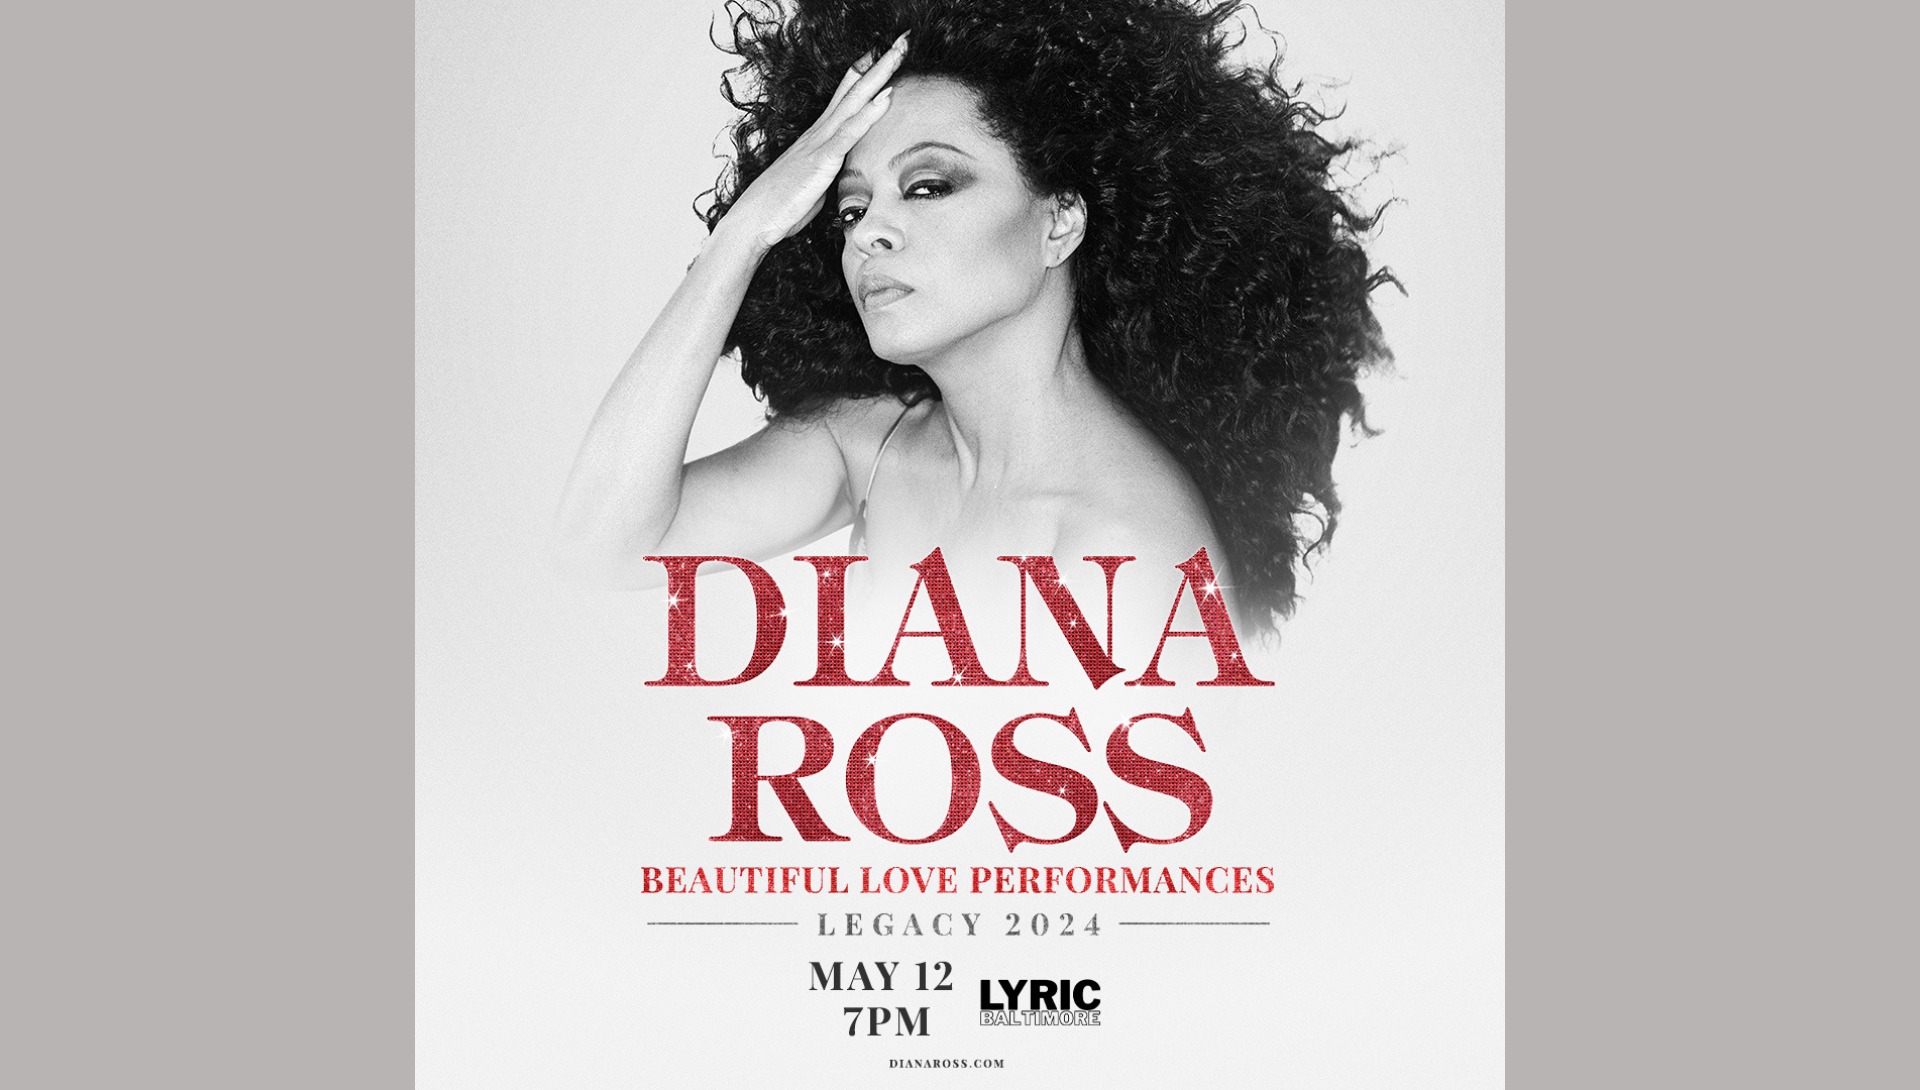 Legendary singer and actress DIANA ROSS will be performing her hits on her ‘Beautiful Love Performances: Legacy 2024 Tour’ to the LYRIC on Sunday, May 12 at 7pm. Tickets go on sale this Friday at Ticketmaster.com and at the Lyric Box Office. In 1993, Ross earned a Guinness World Record for having more hits than any other female artist on the charts with a career total of over 75 hit singles. Aside from the numerous awards Ross has won, she has also been inducted into the Rock & Roll Hall of Fame and the Songwriters Hall of Fa